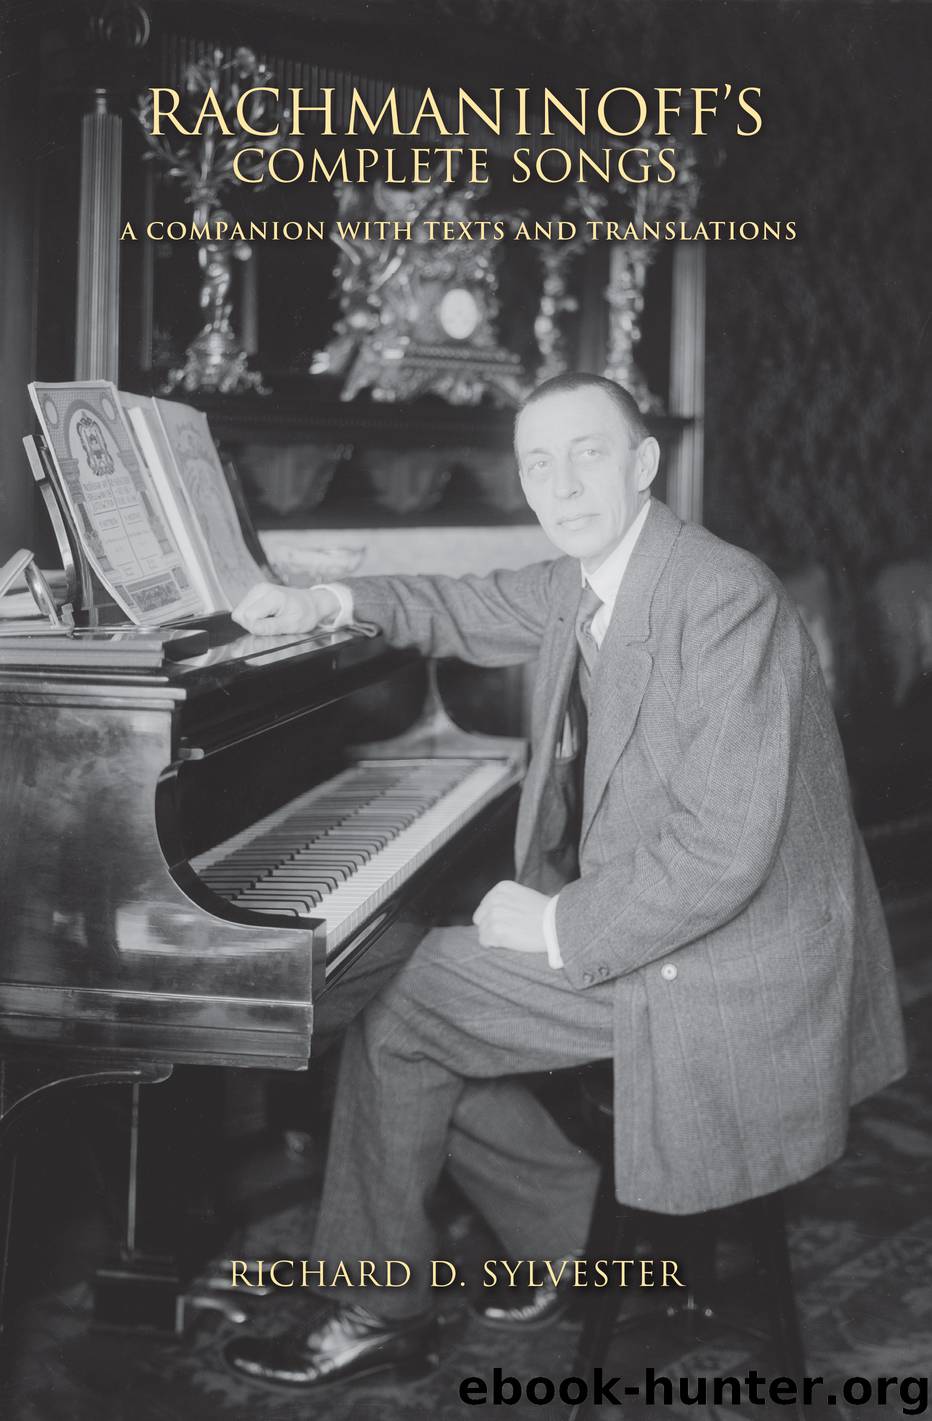 Rachmaninoff's Complete Songs by Richard D. Sylvester